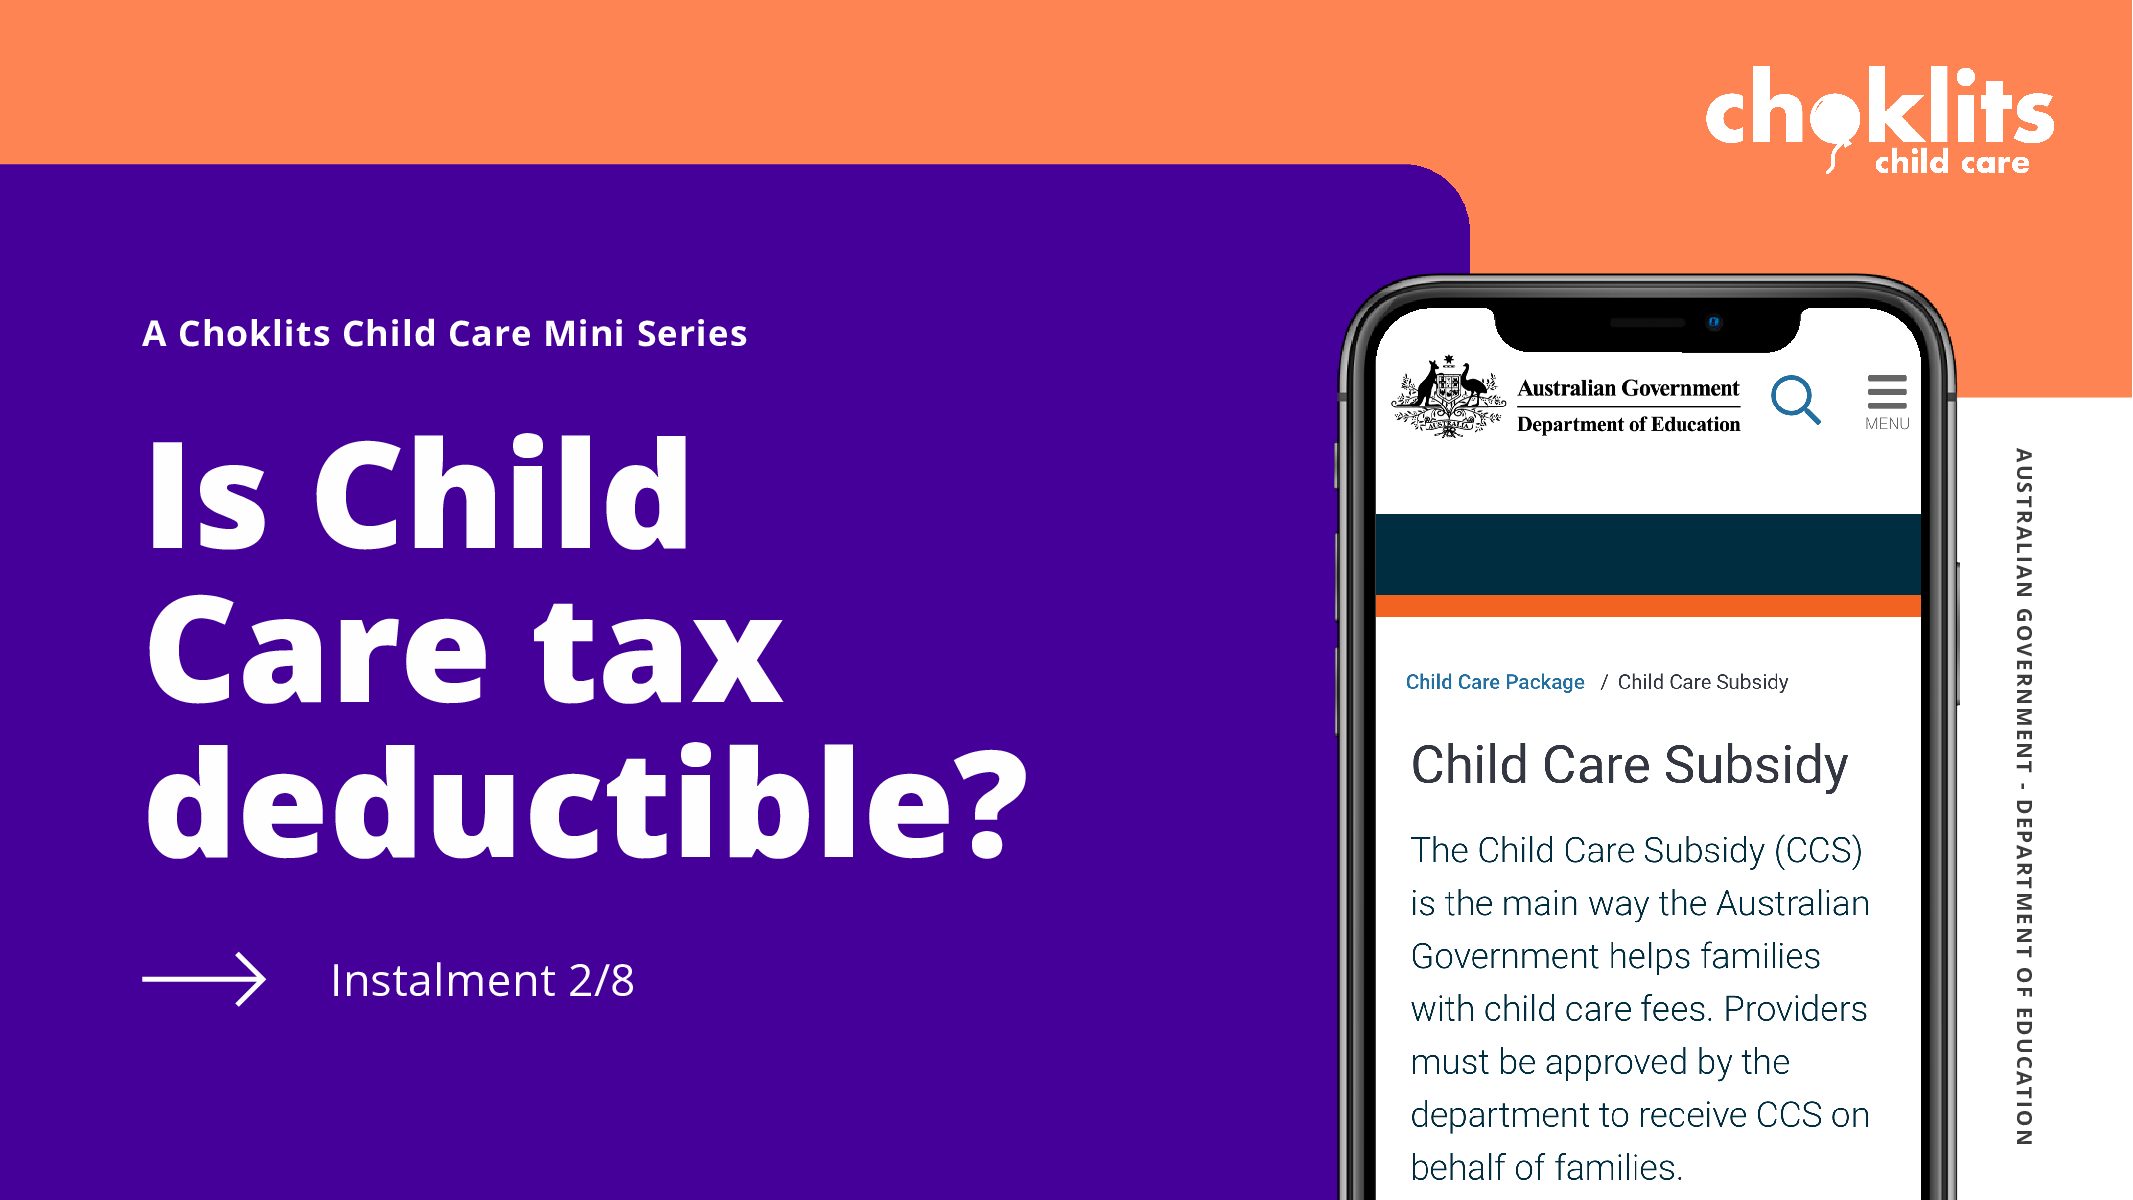 is-child-care-tax-deductible-choklits-child-care